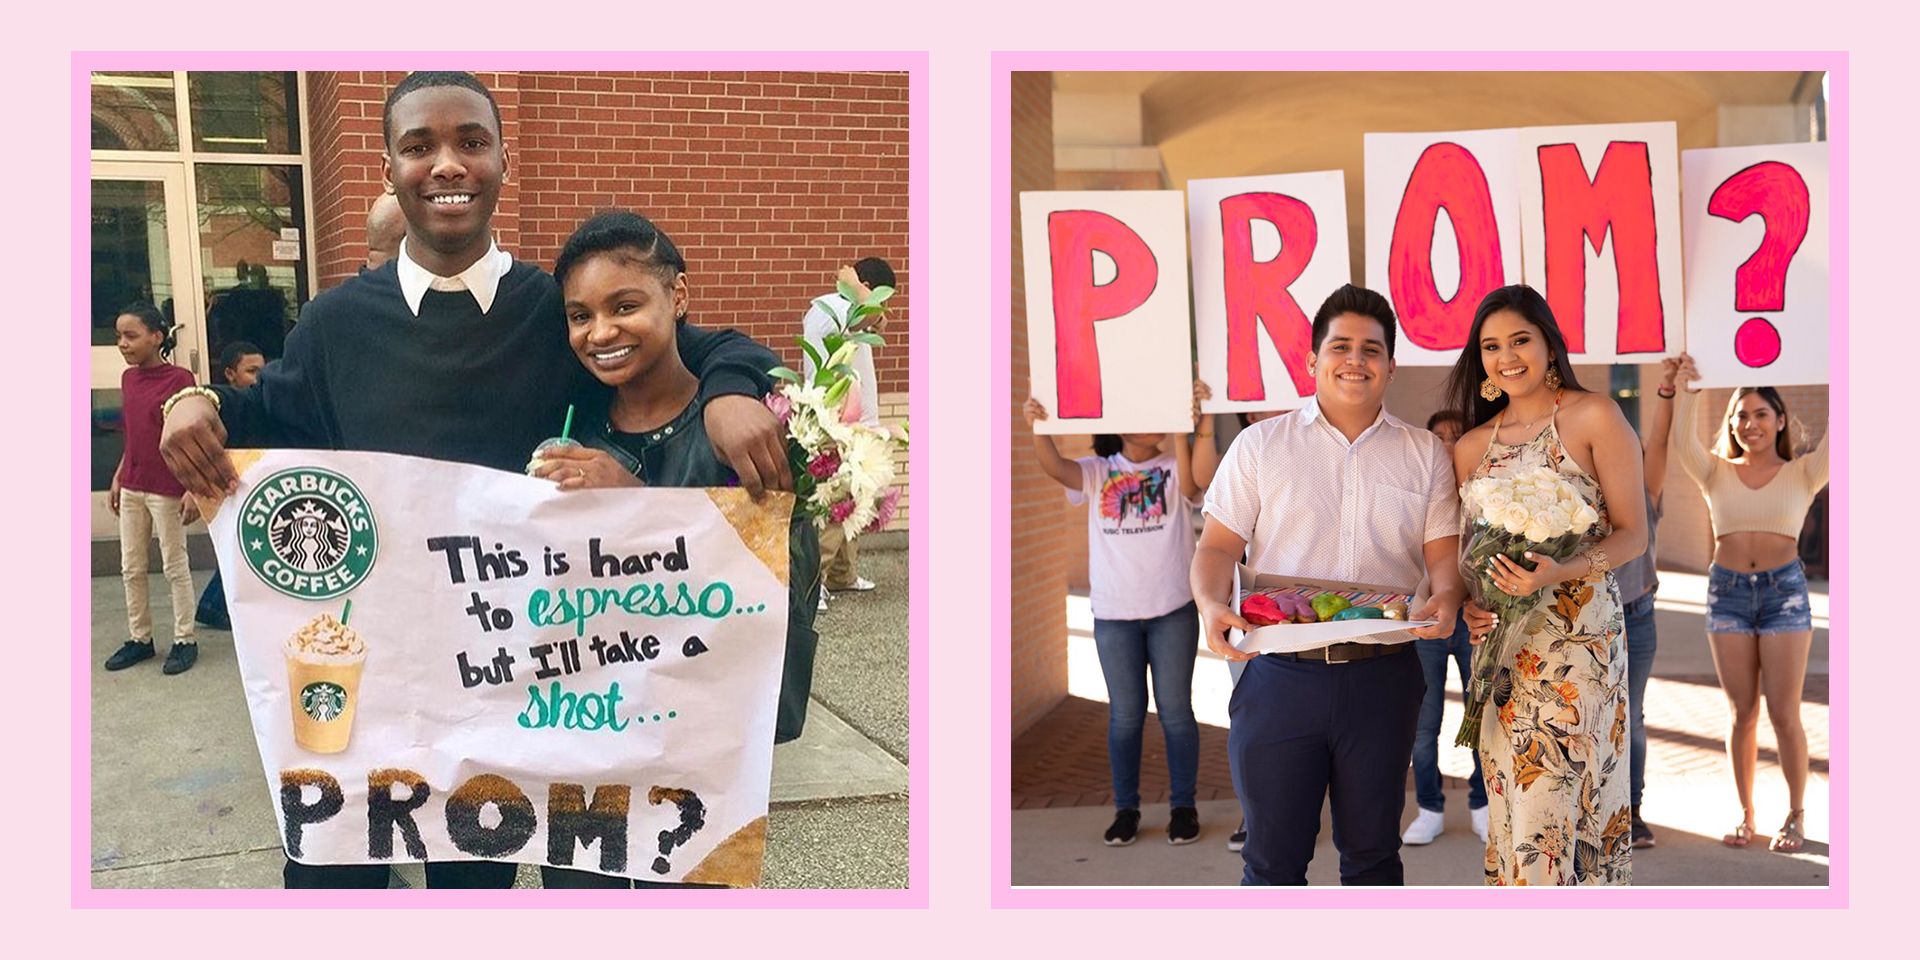 Cute ways to ask a girl to prom with balloons 31 New Ways To Ask Someone To Prom 2020 How To Ask A Girl To Prom